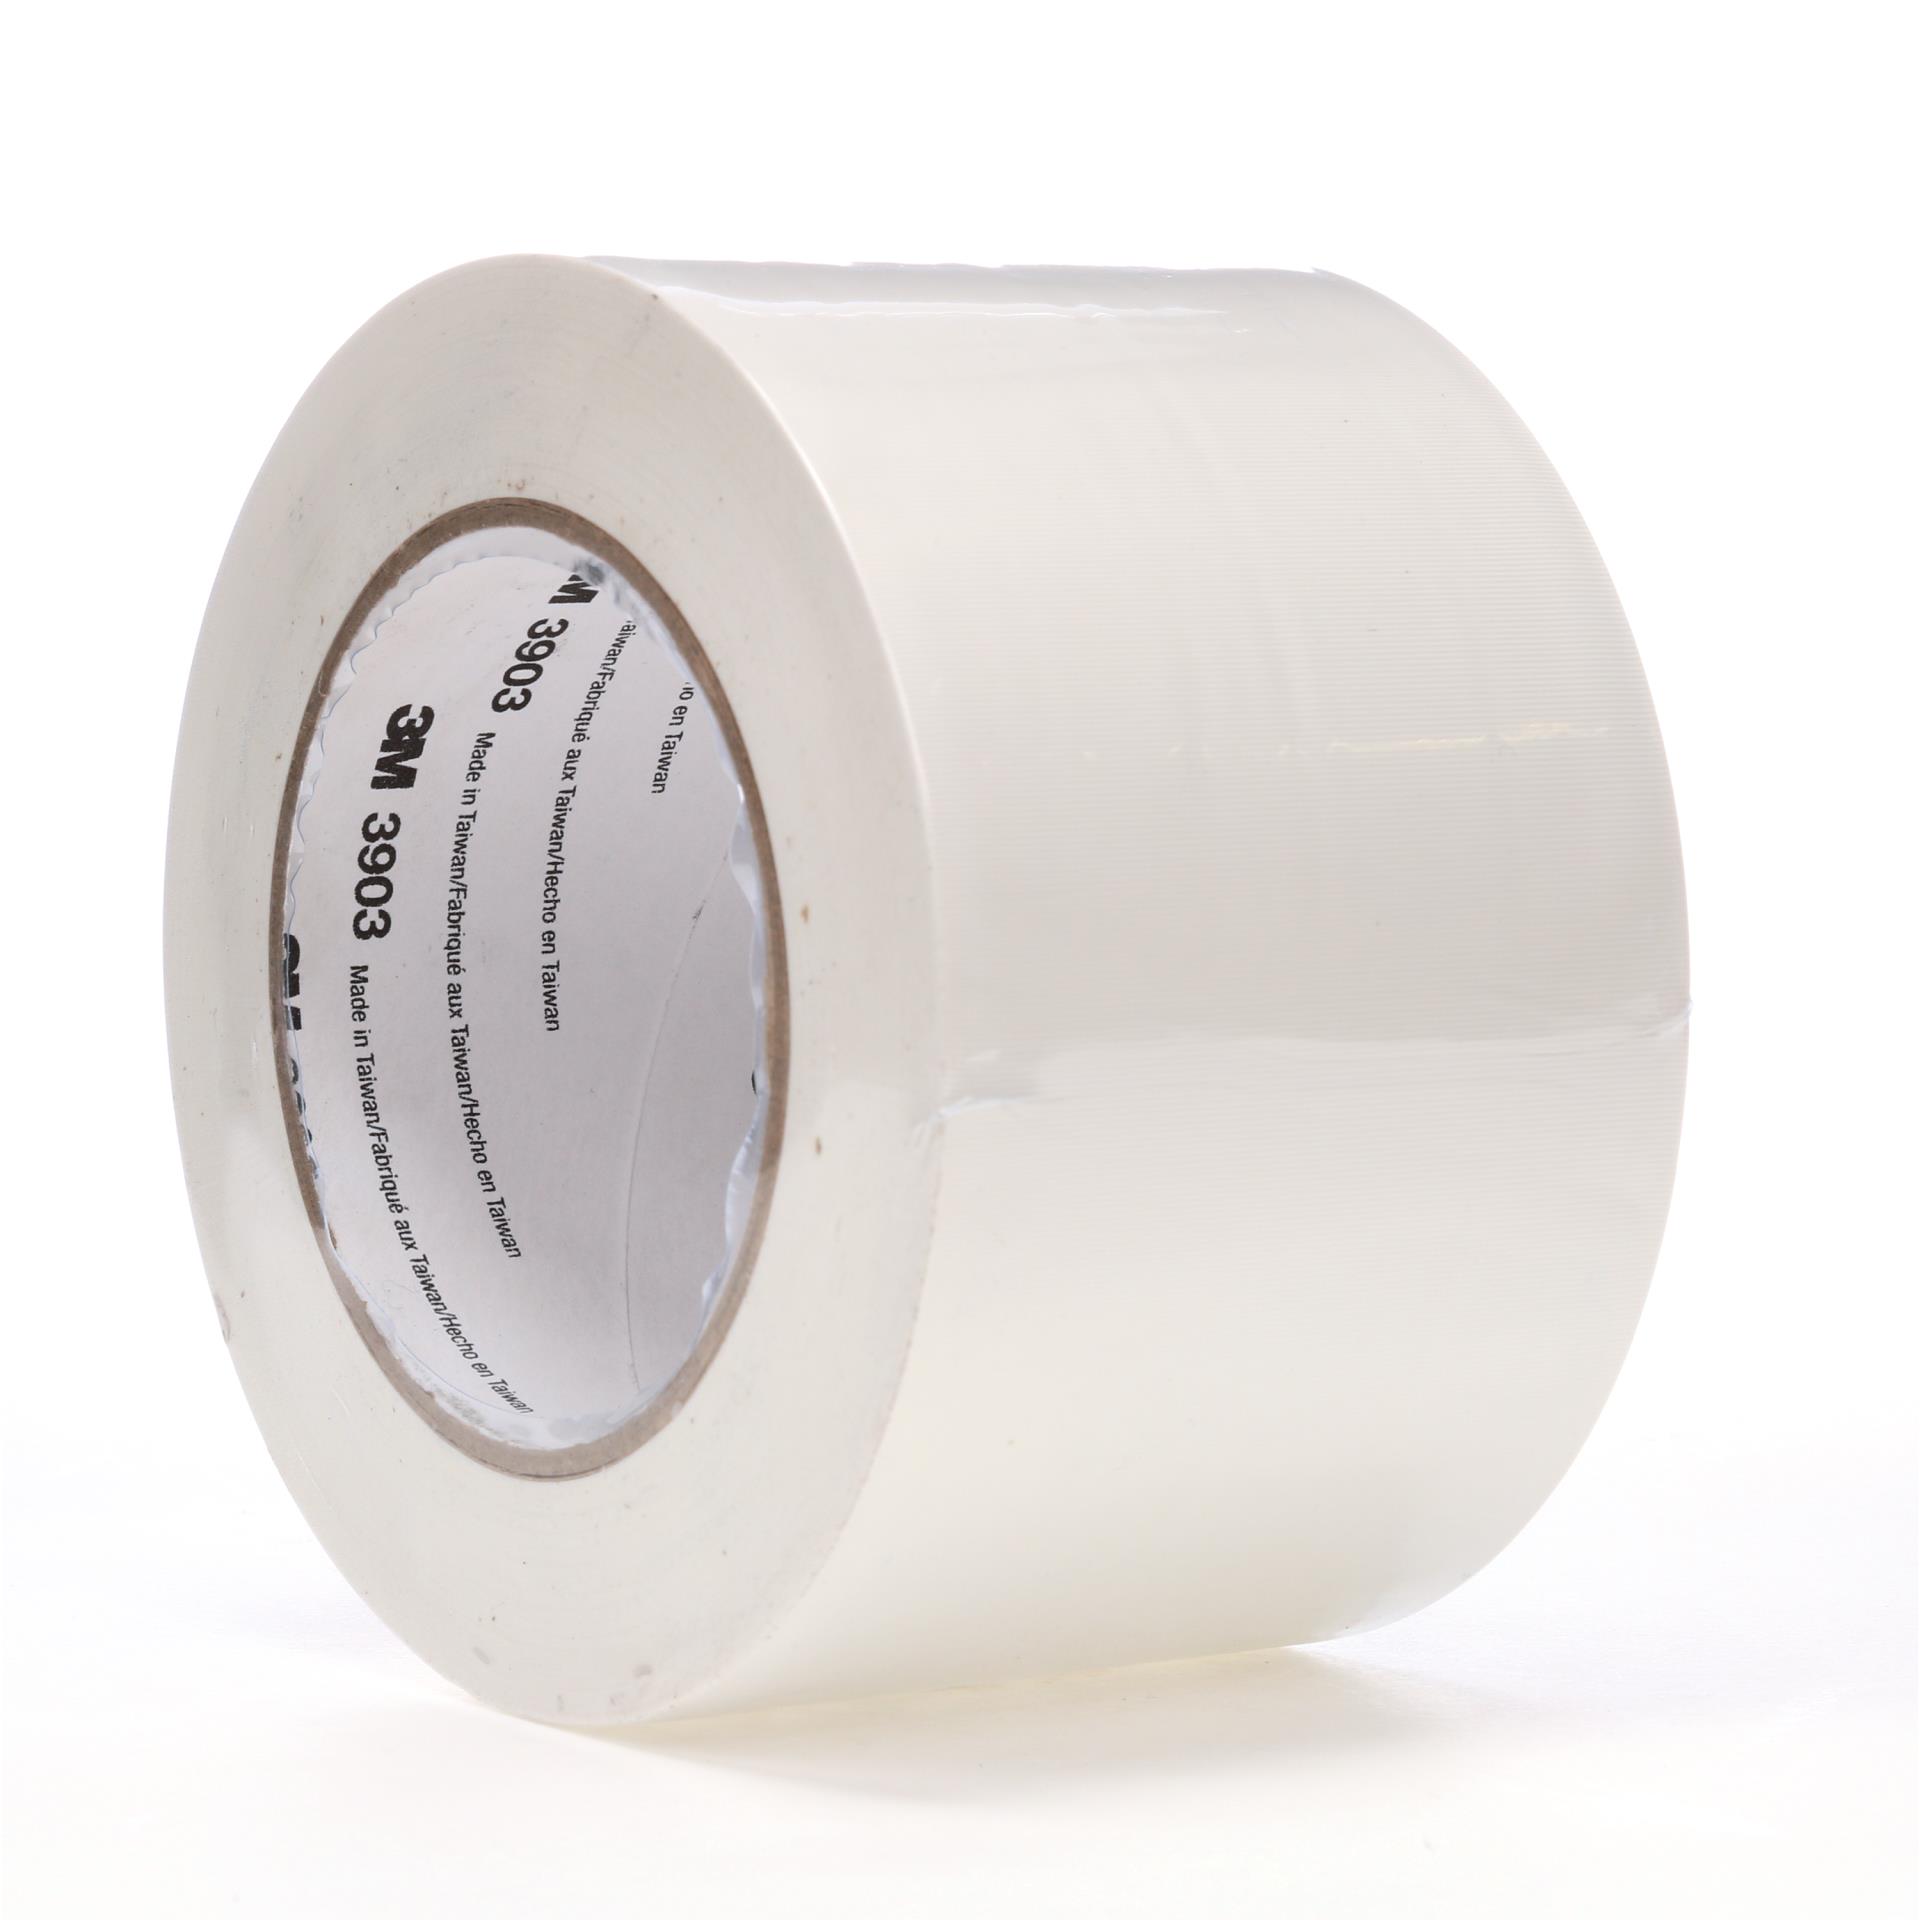 3M™ Adhesive Transfer Tape Extended Liner 9934XL